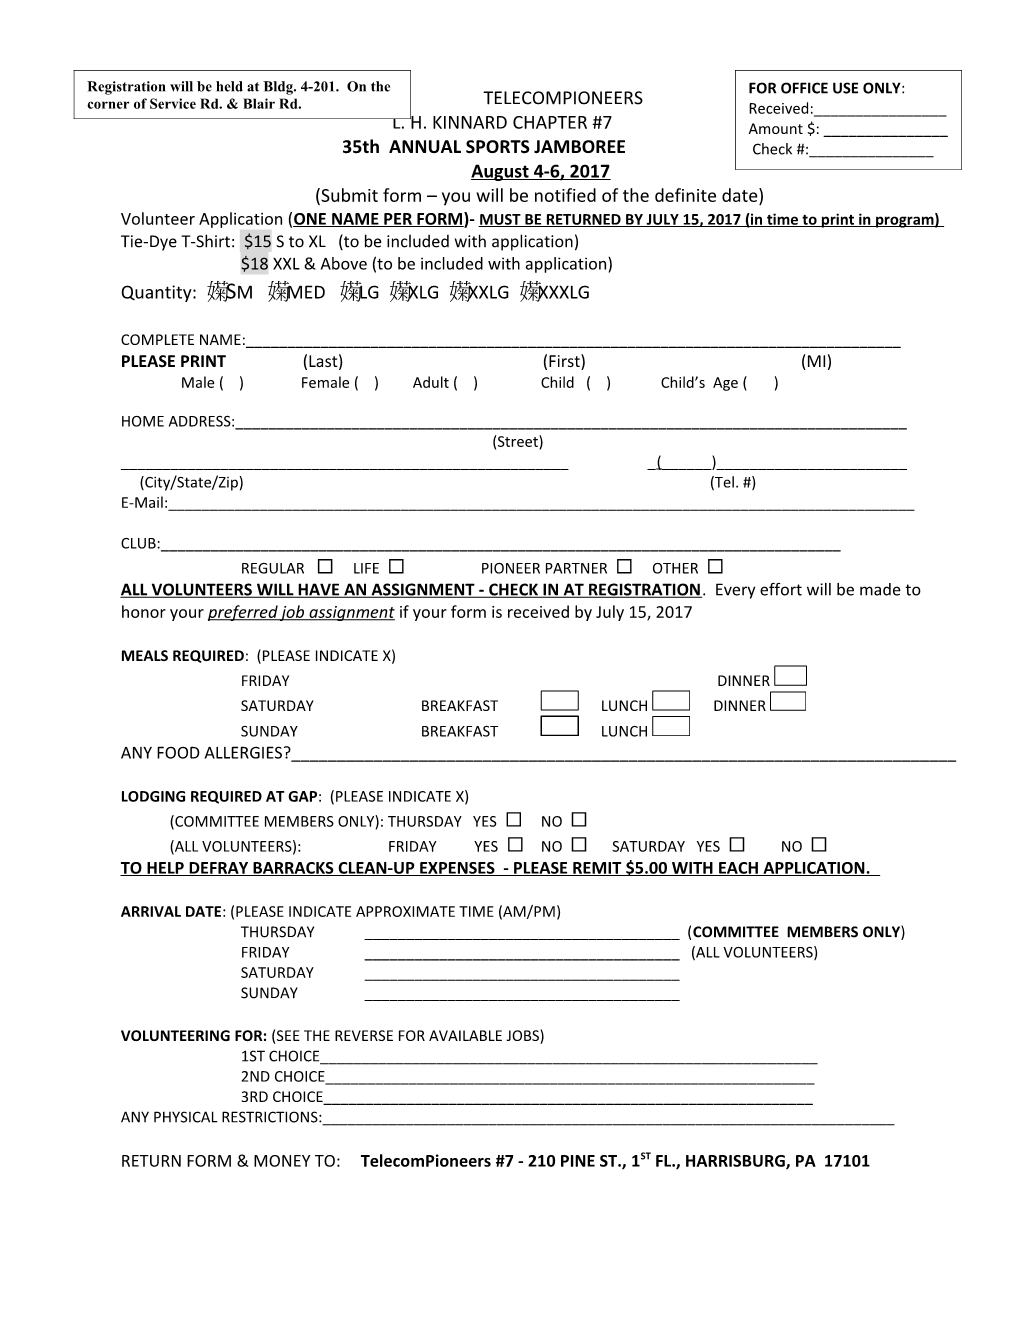 Submit Form You Will Be Notified of the Definite Date